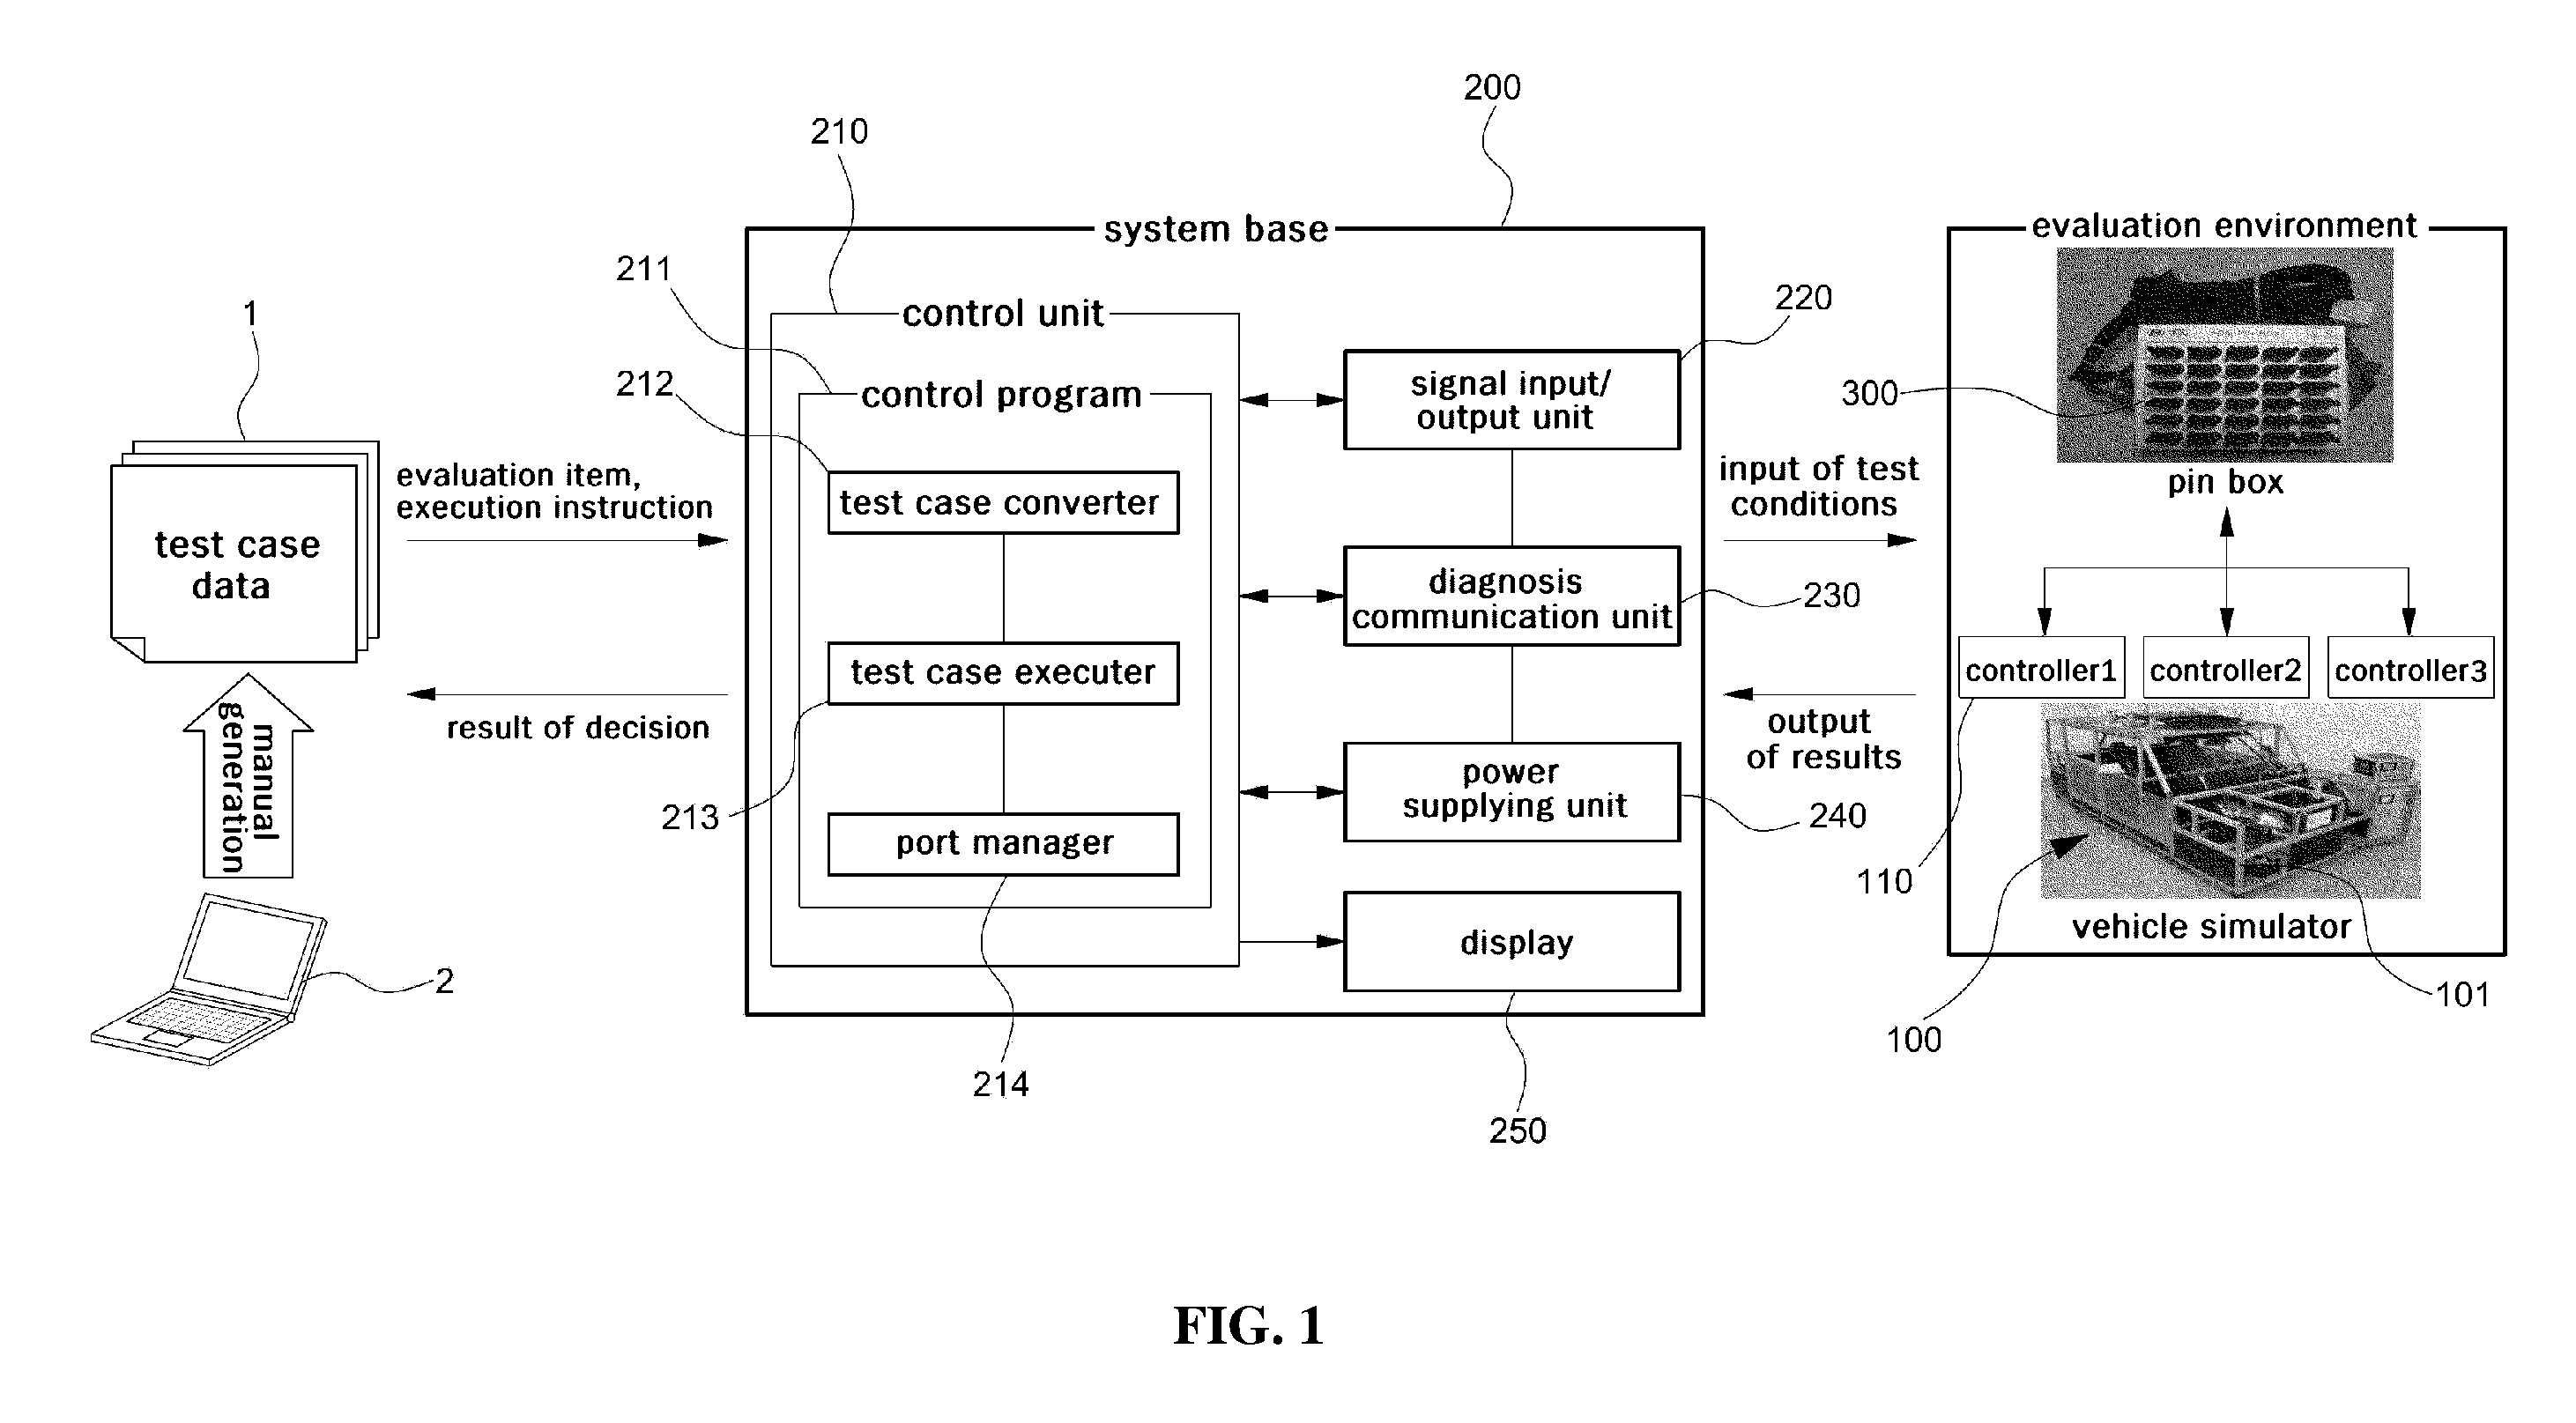 Automatic evaluation system for vehicle devices using vehicle simulator